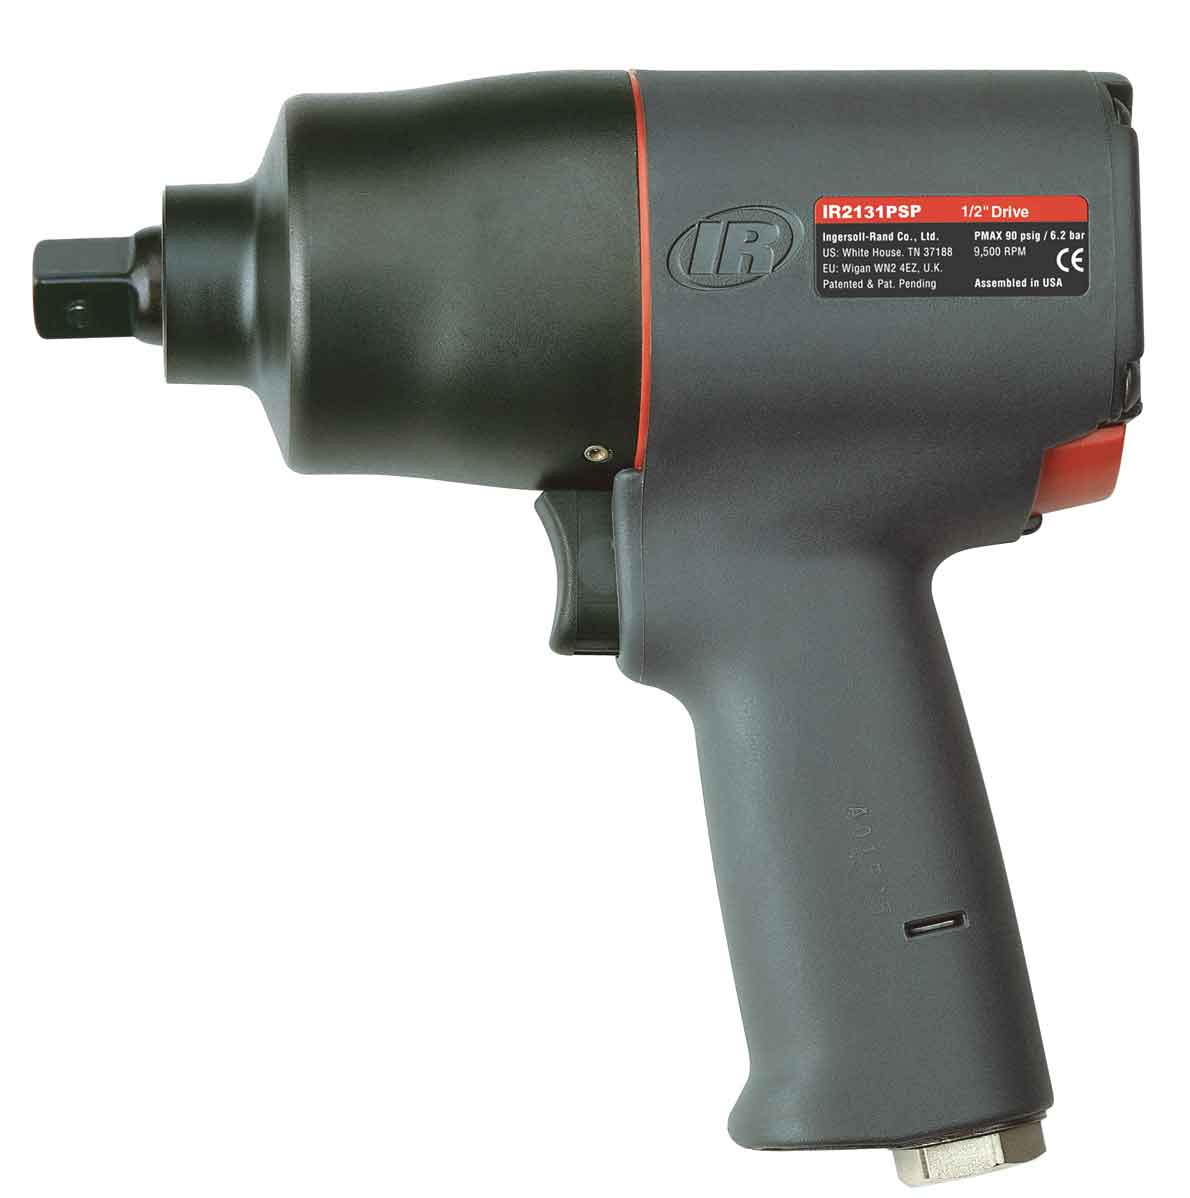 ATEX 2131 Series Impact Wrench | Ingersoll Rand Power Tools